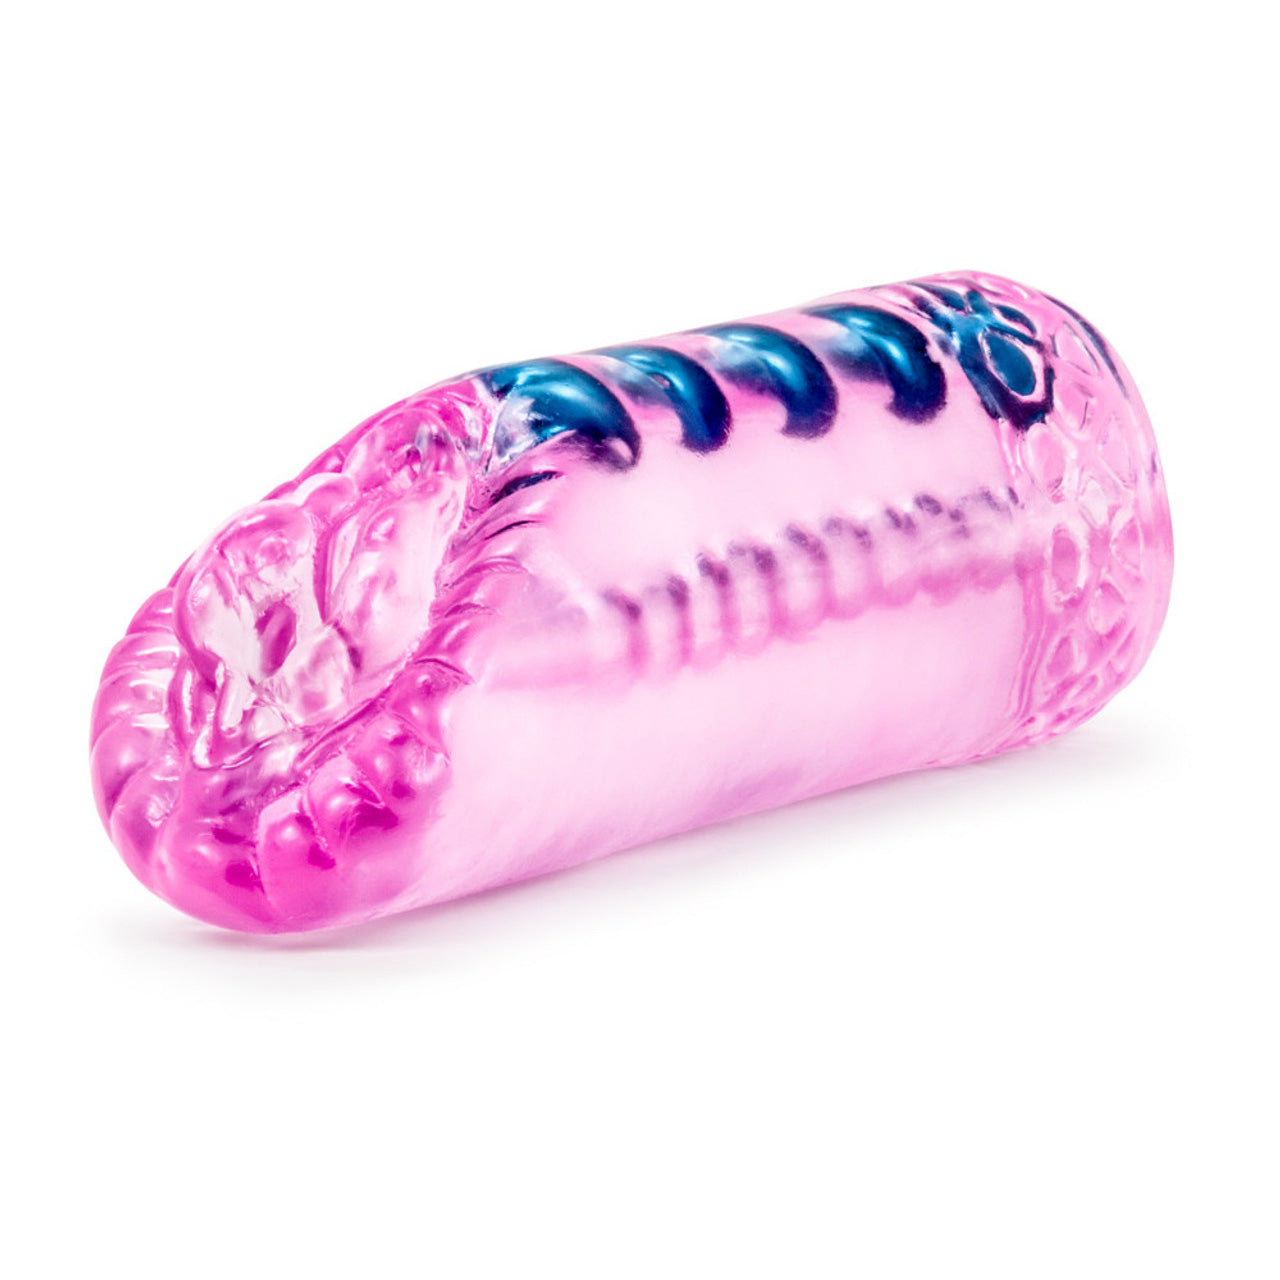 M for Men - Sexy Snatch - Pink - Thorn & Feather